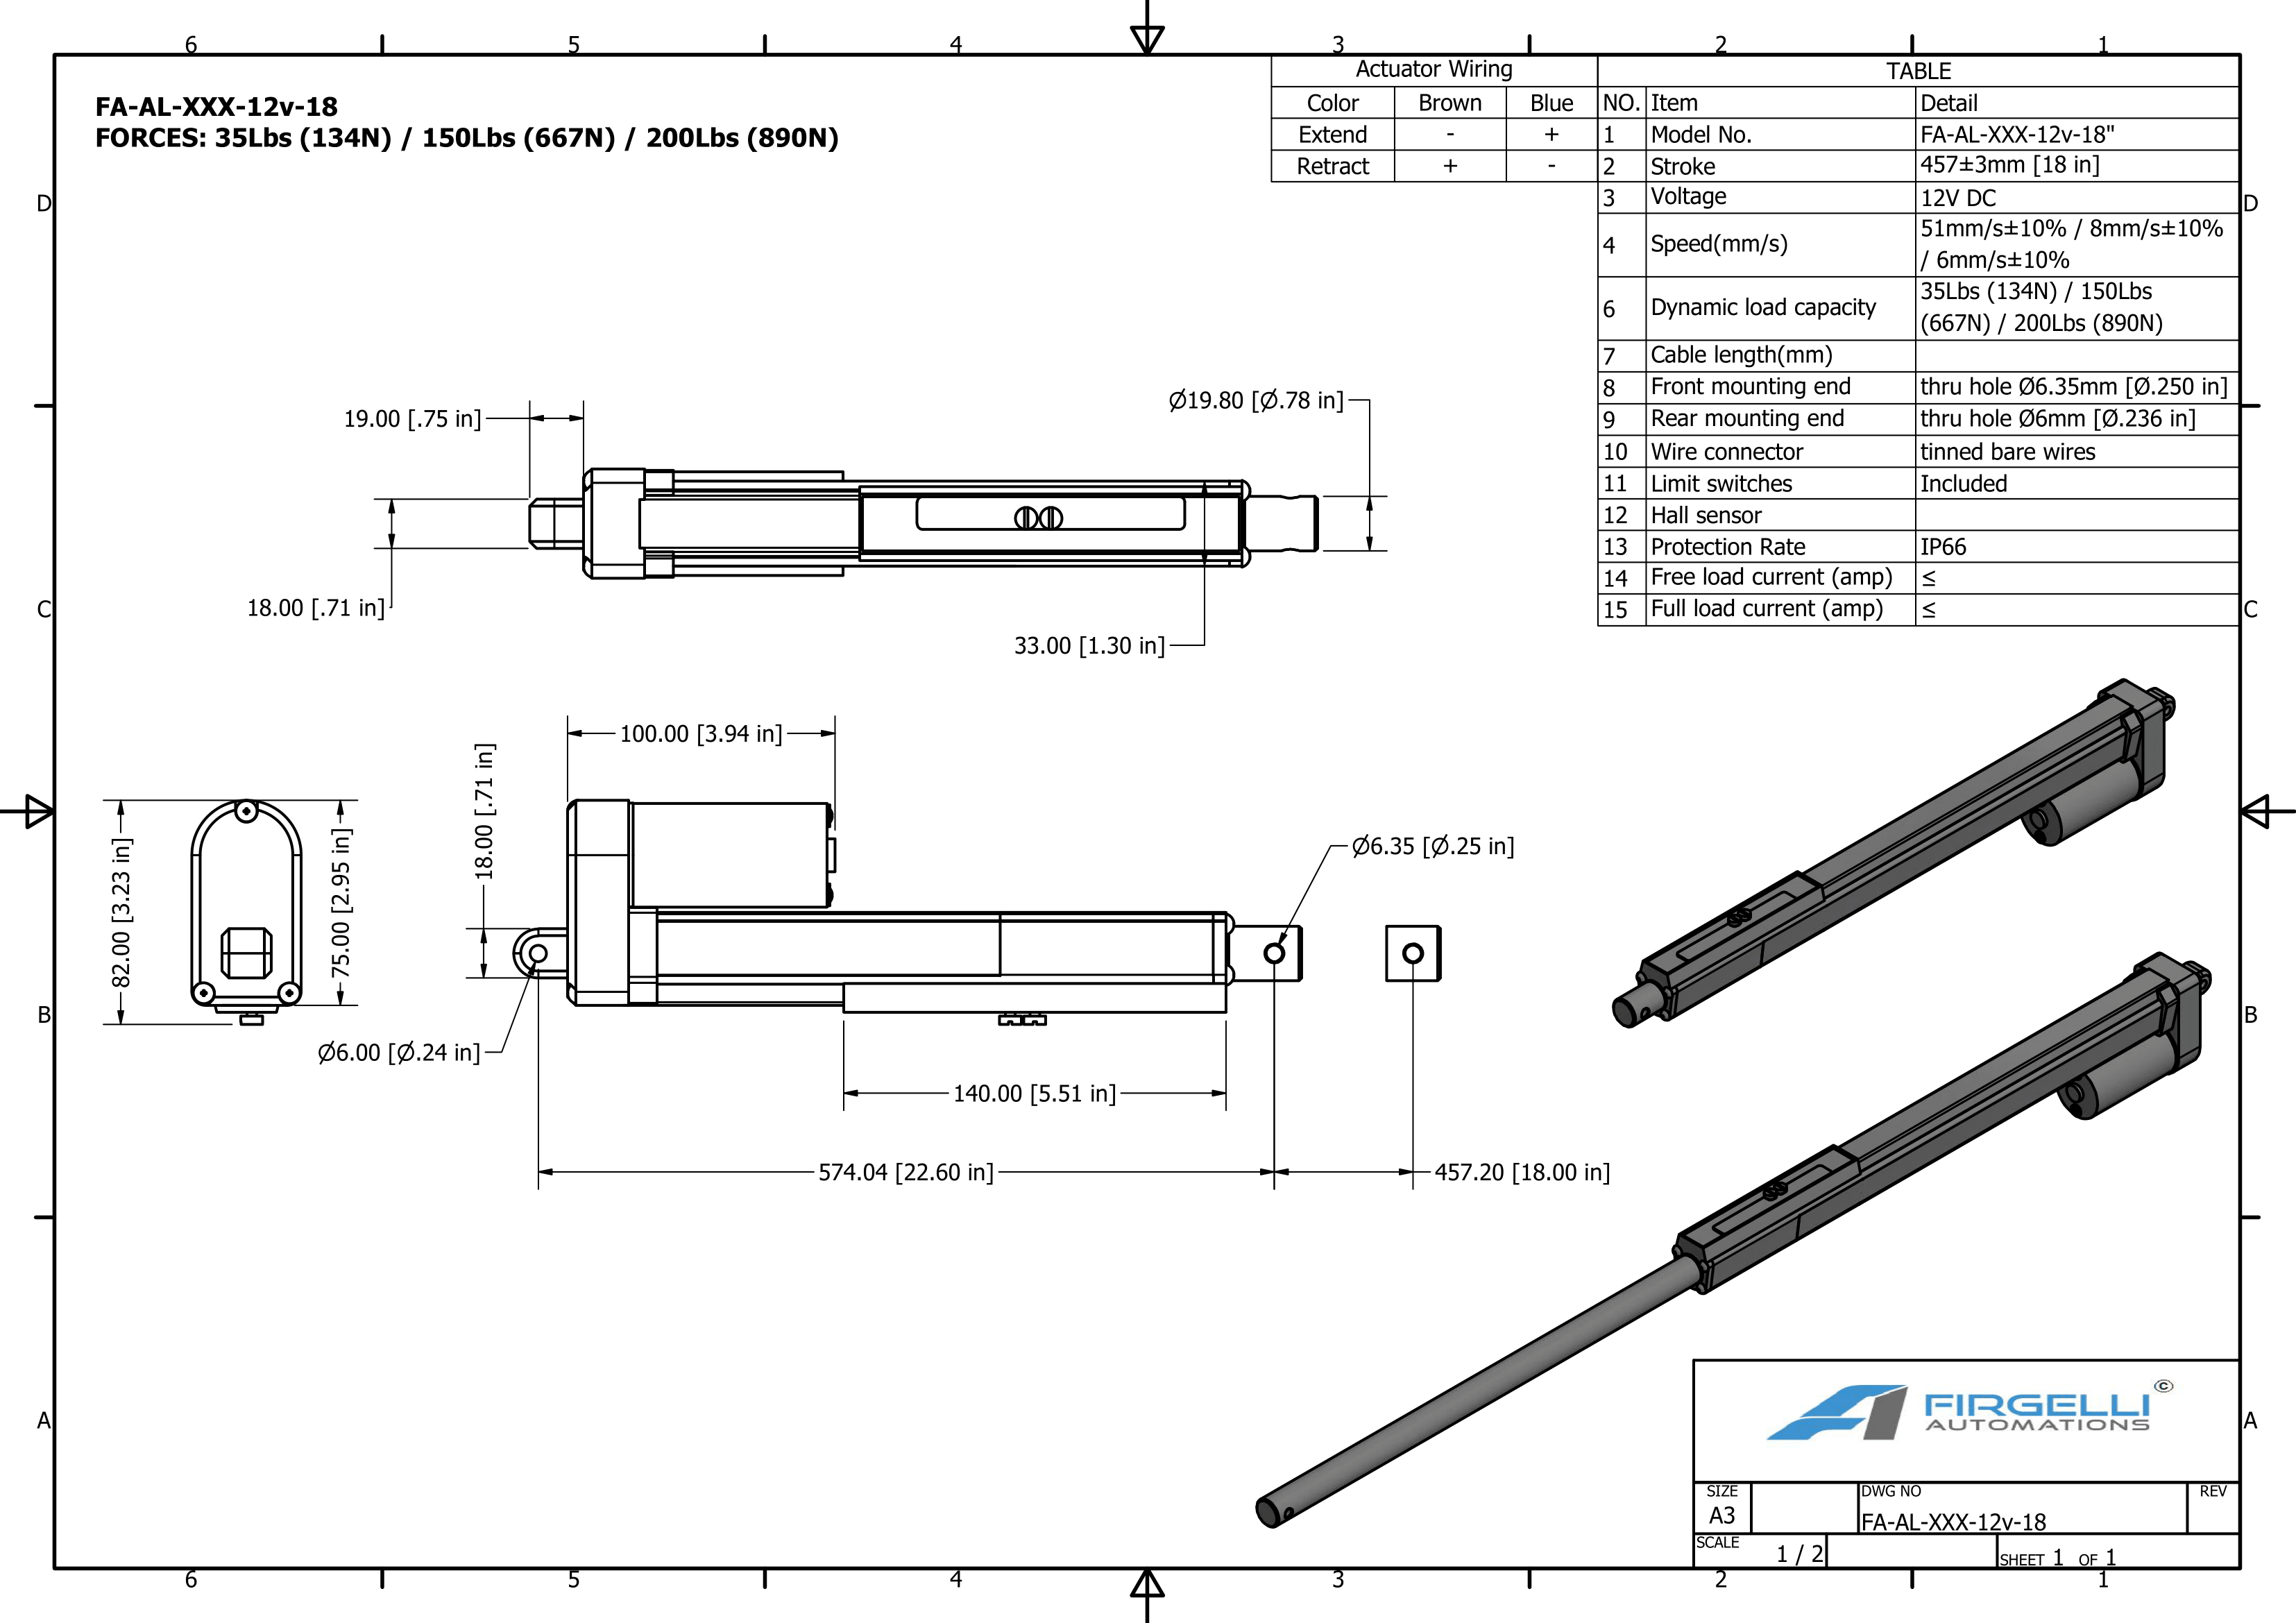 Adjustable stroke actuator dimensions with a 18 inch stroke